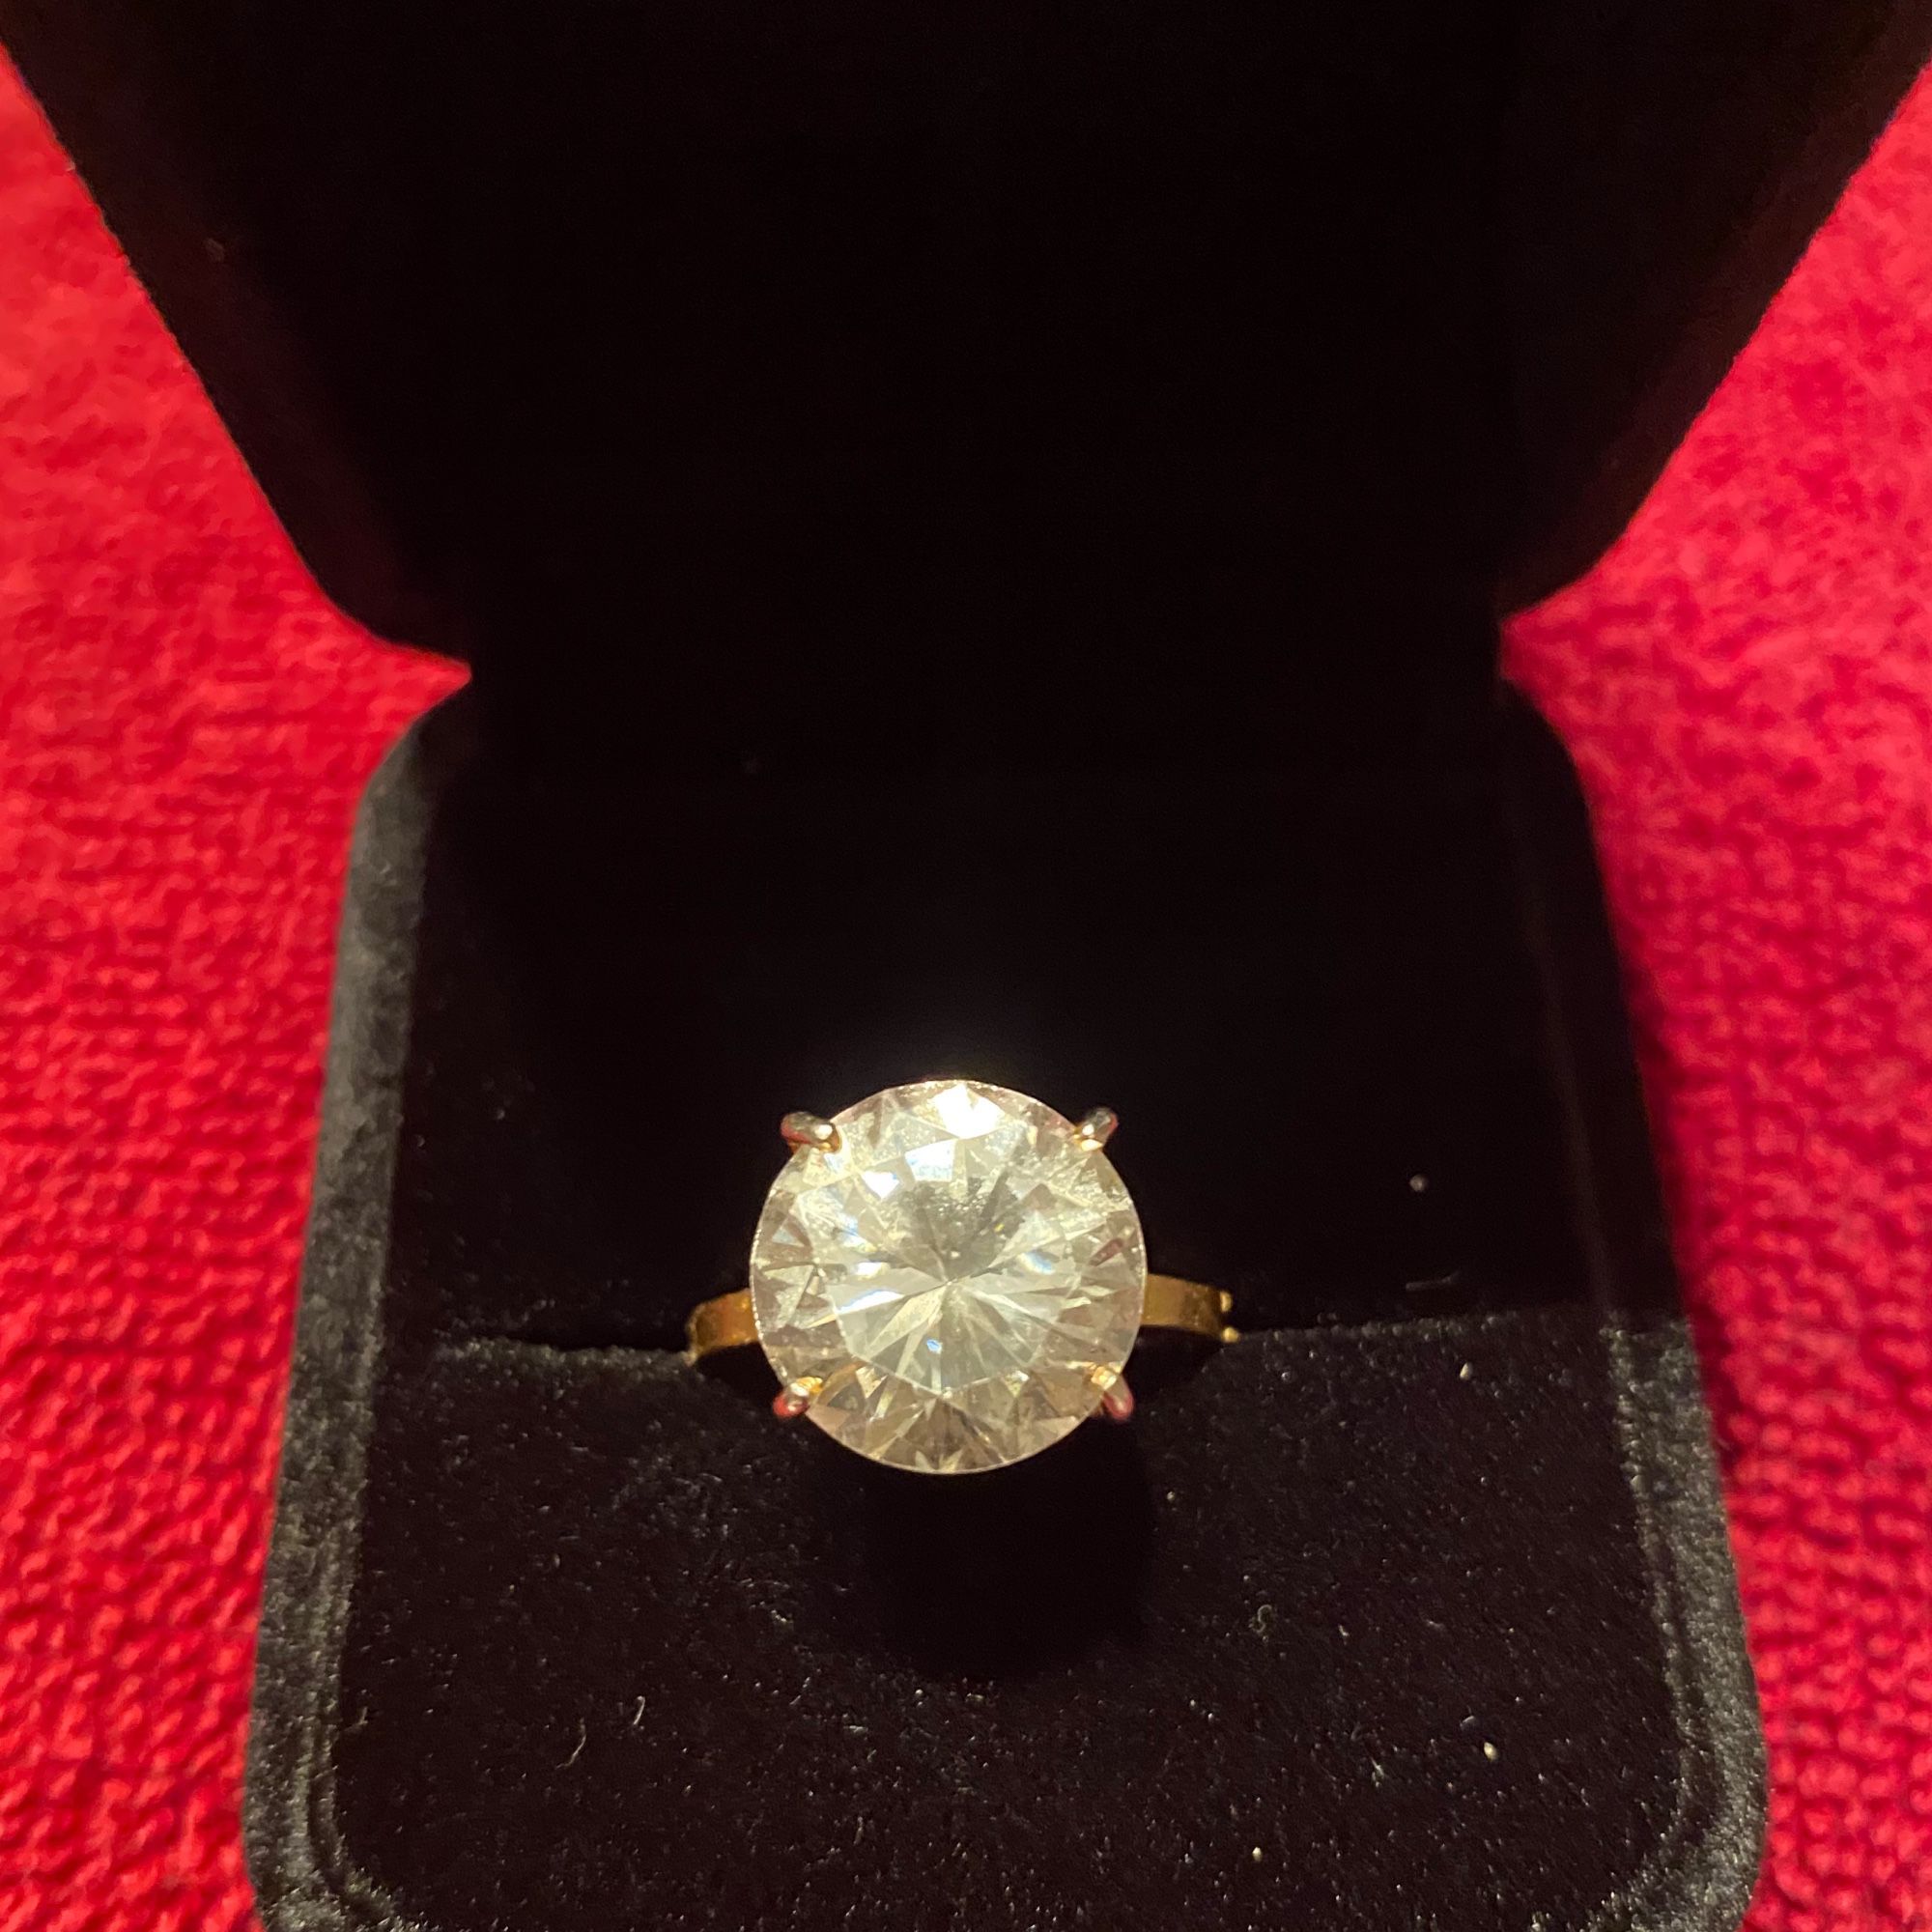 Fake 5 carat diamond ring which is adjustable.